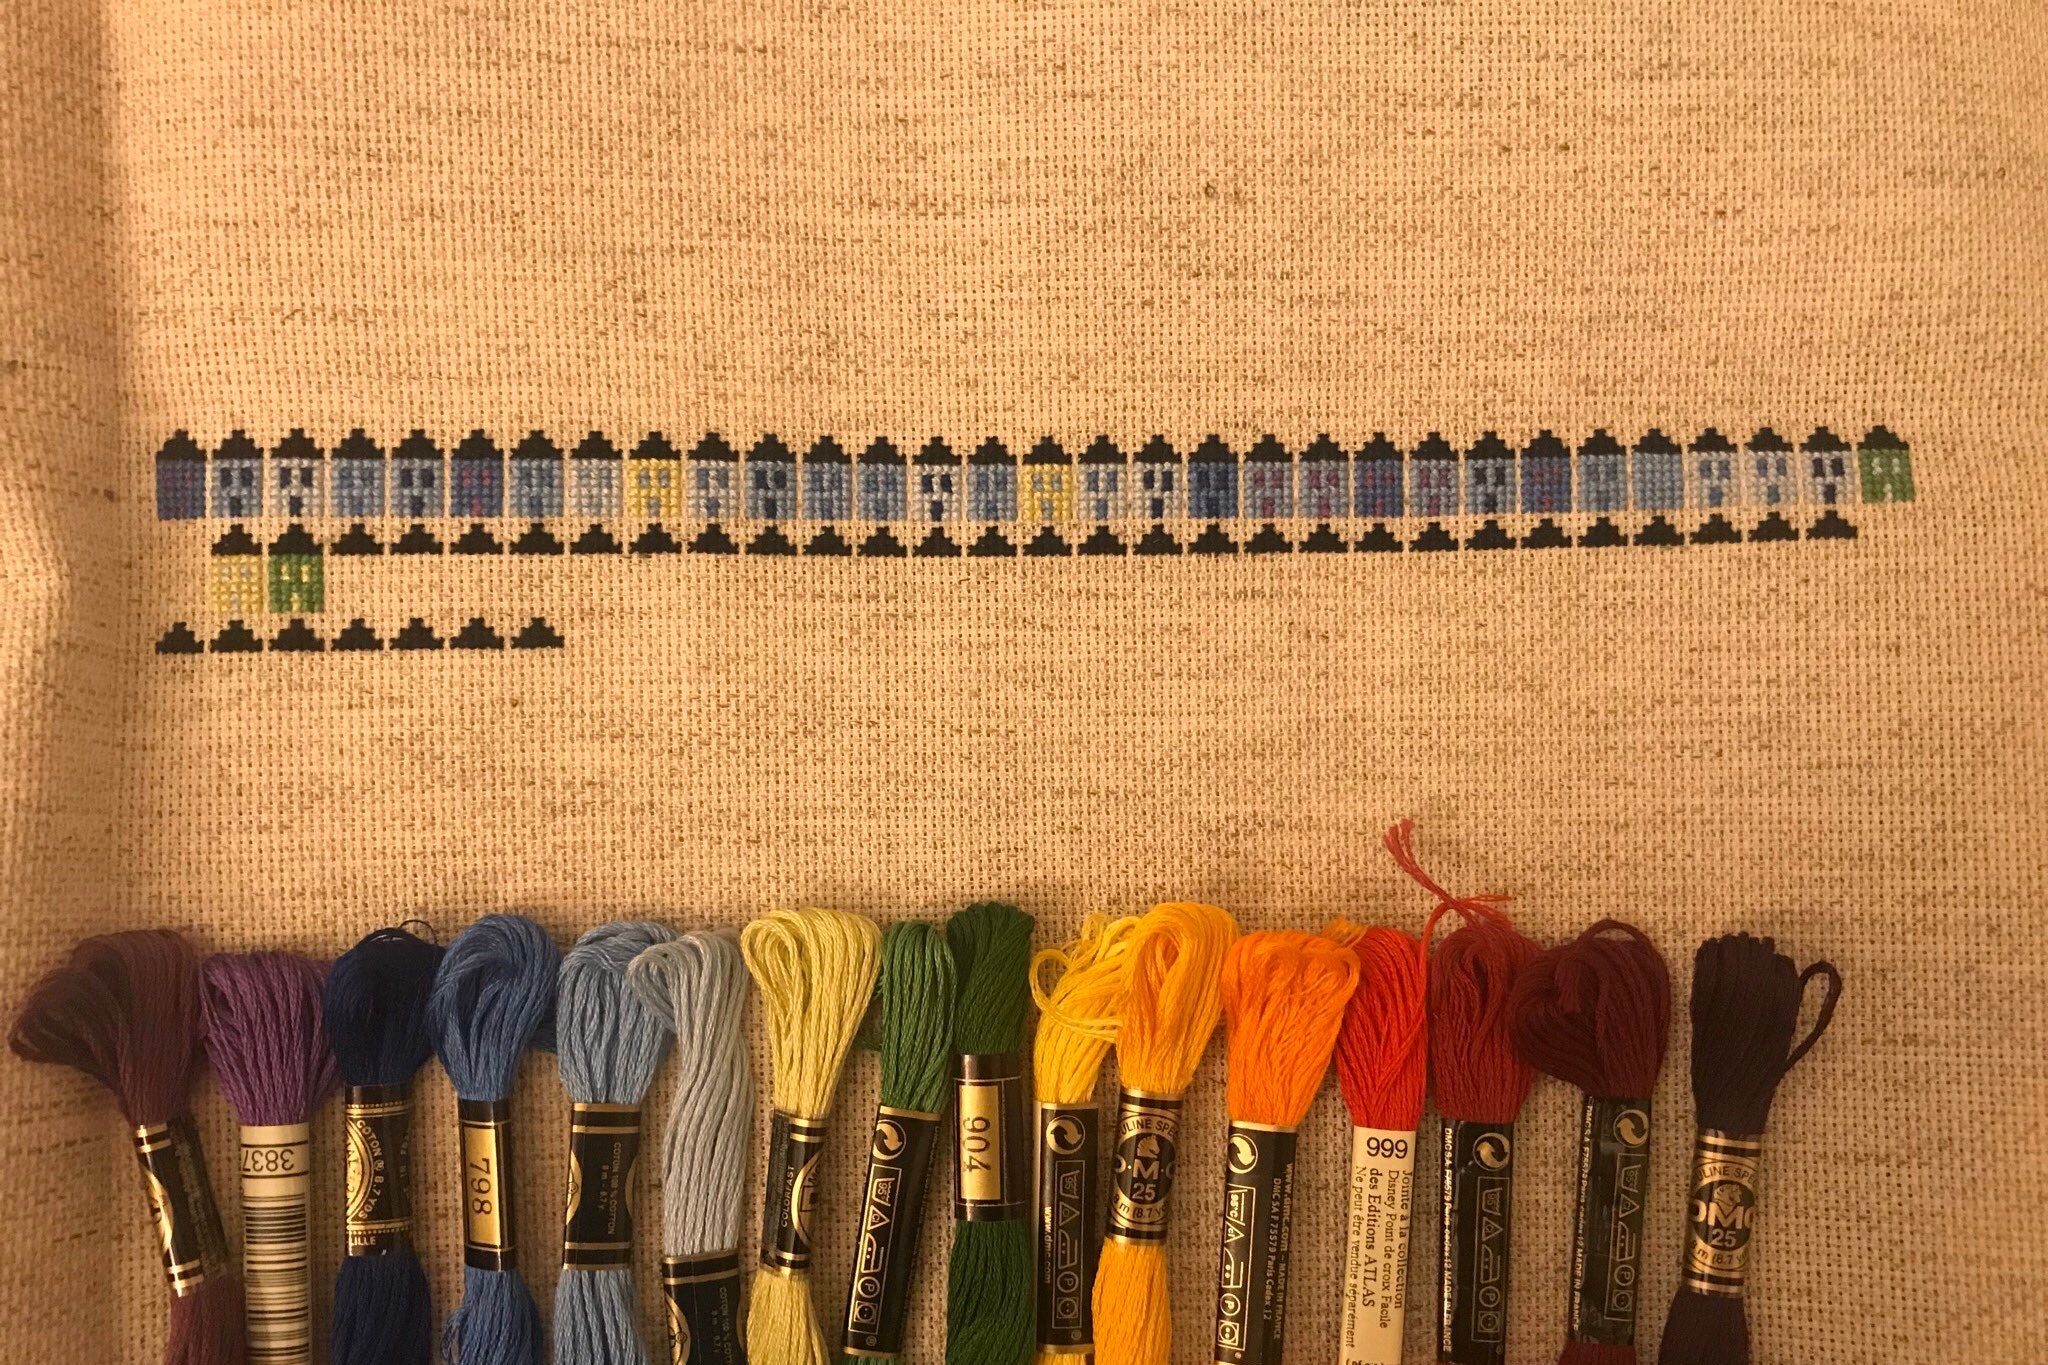 A row of cross-stitched houses in different colors, above a row of embroidery floss